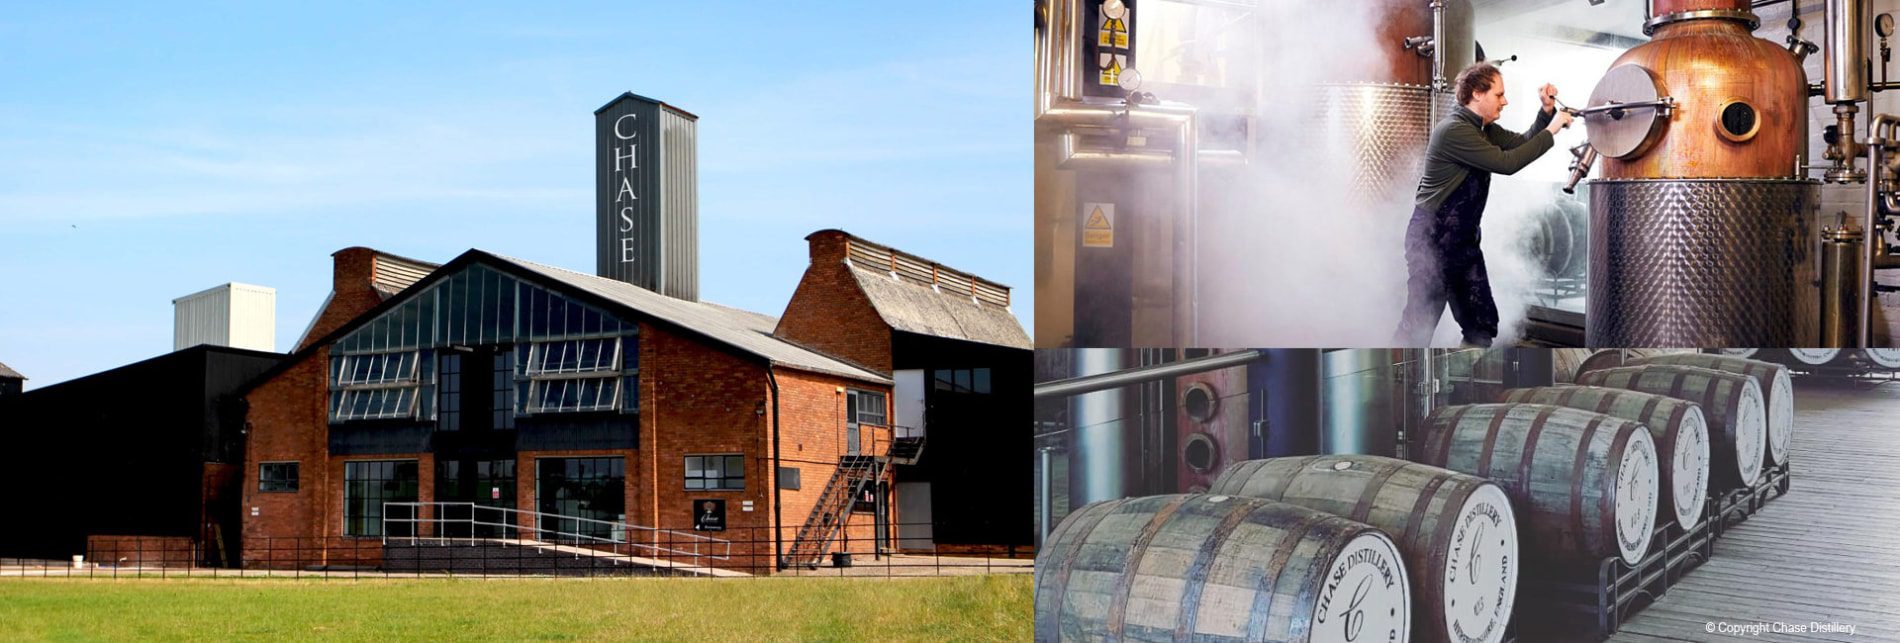 Retrospective Planning Permission Granted at Rosemaund Farm, Herefordshire – The Home of Chase Distillery and Chase Farm thumbnail image